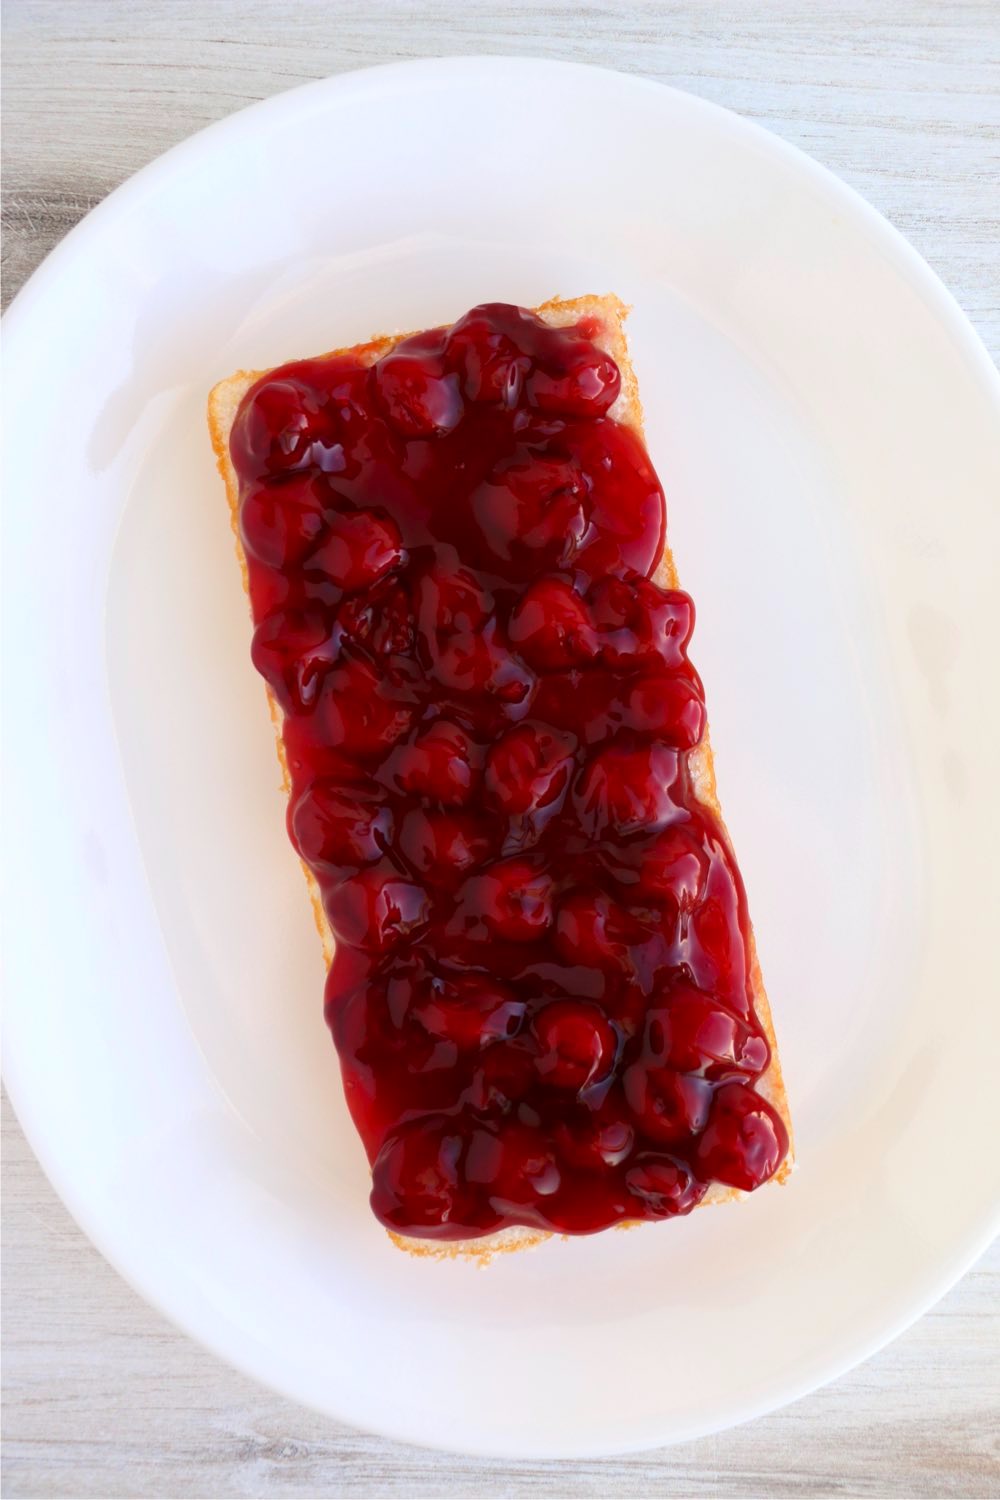 Layer of pound cake on white plate covered with canned cherries